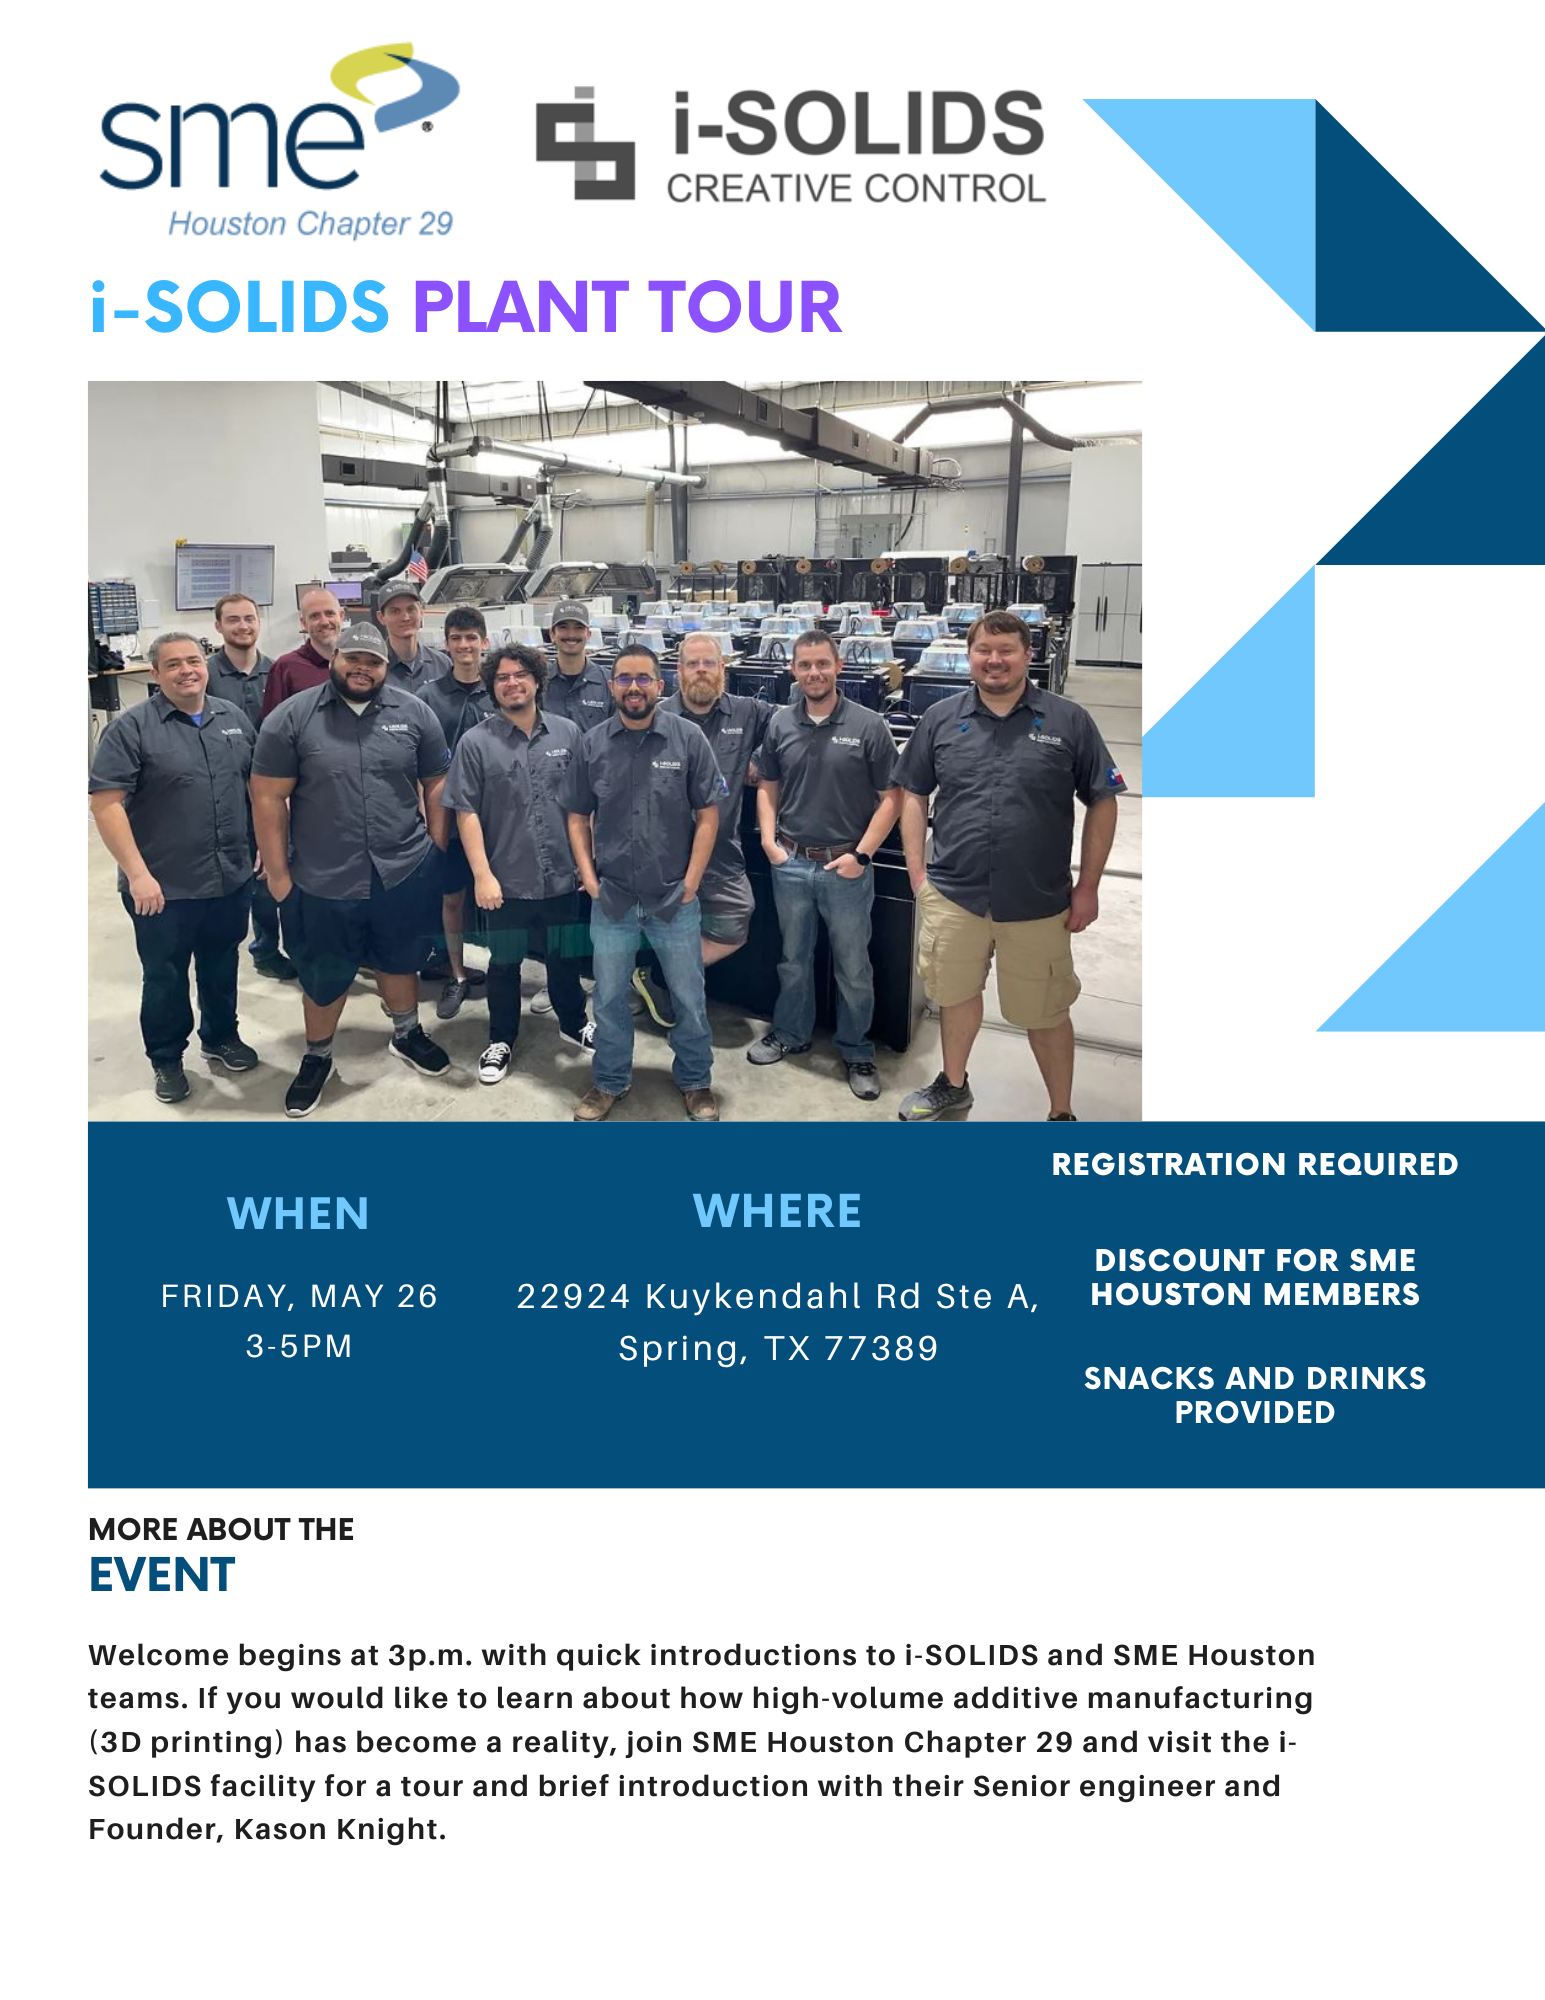 i-SOLIDS Plant Tour with SME Houston Chapter 29 1386